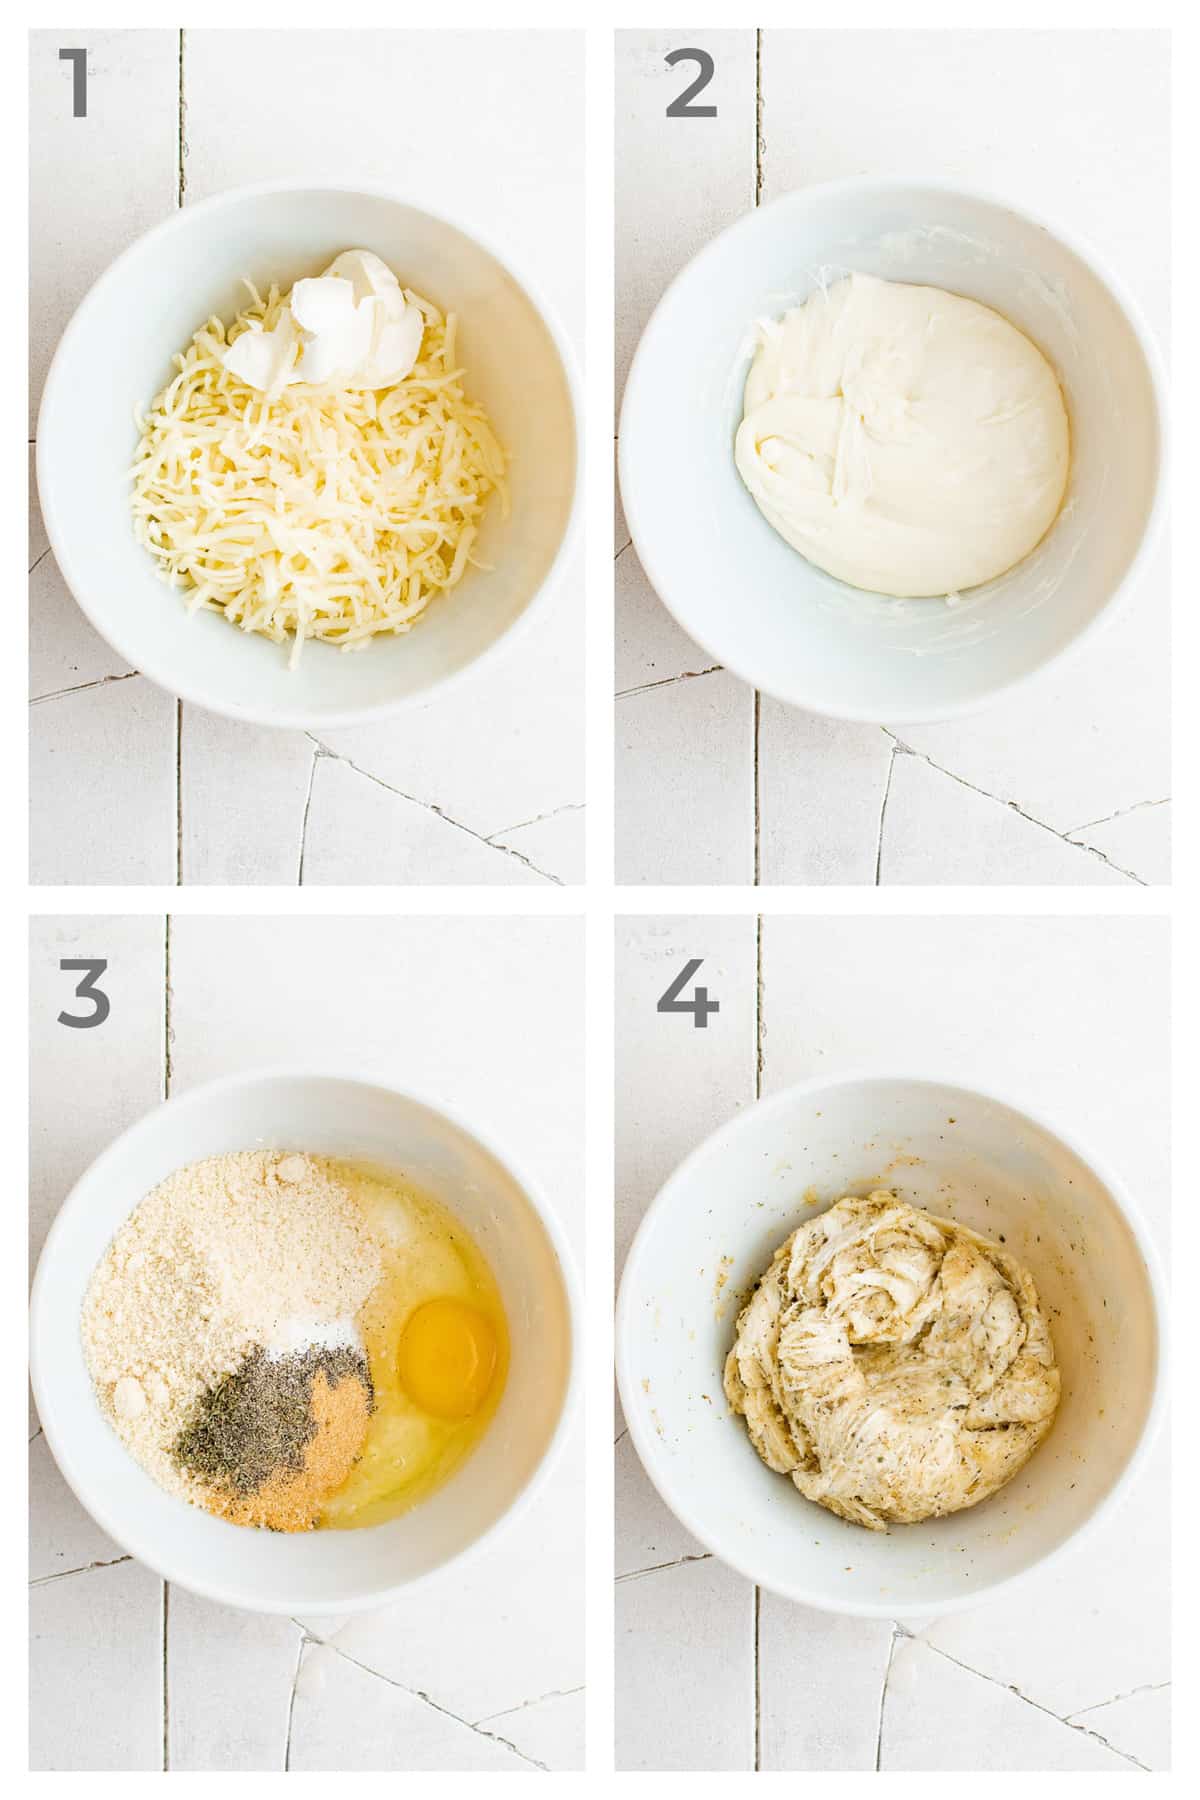 Step by step directions for making a low carb pizza crust